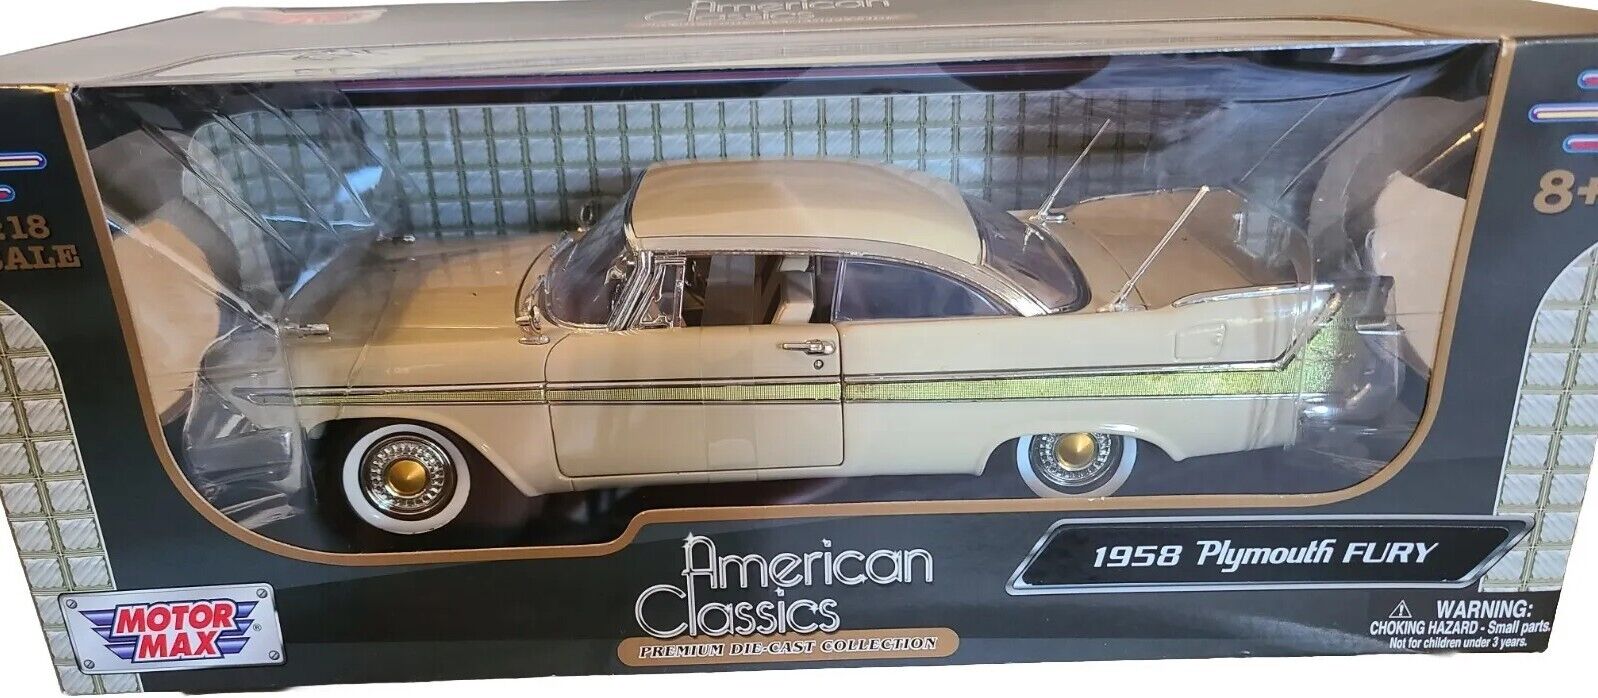 Motor Max American Classics Premium Die-Cast Collection 1958 Plymouth Fury